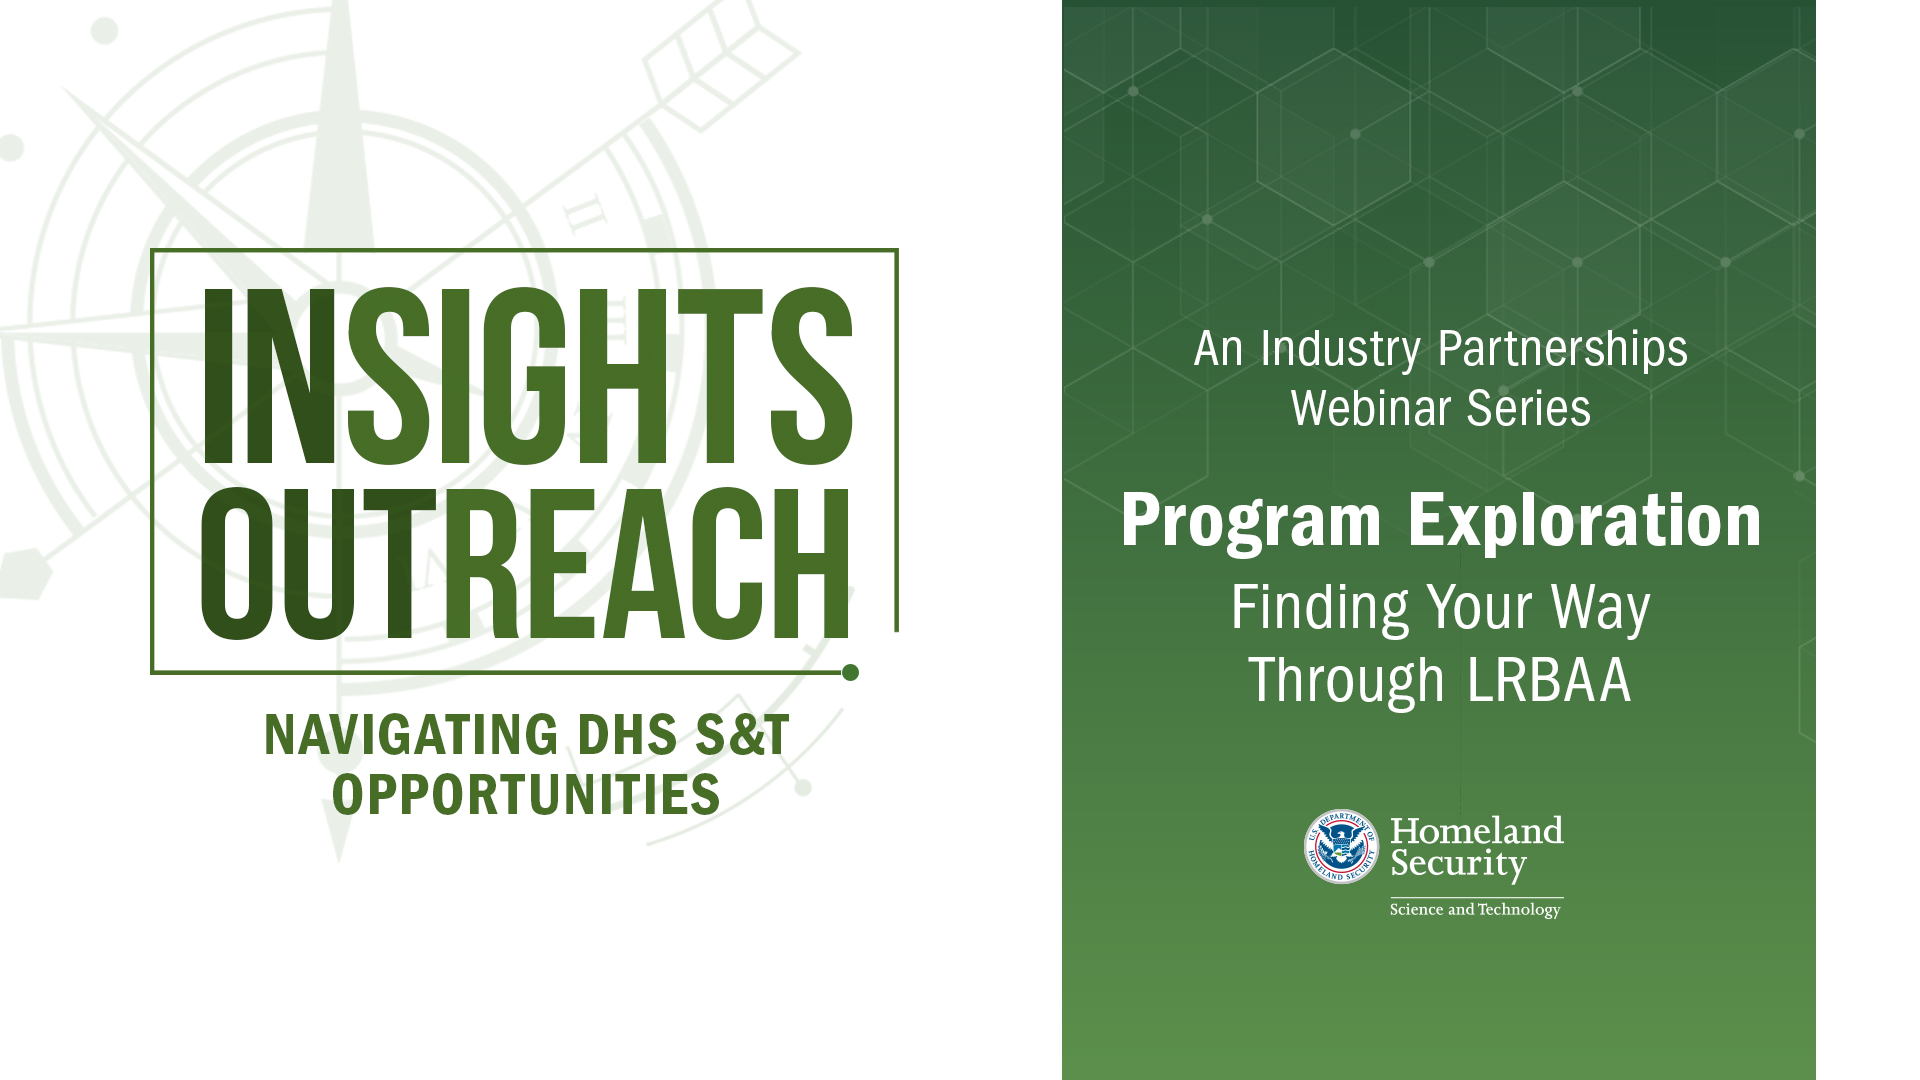 Insights Outreach - Navigating DHS S&T Opprotunities | An Industry Partnerships Webinar Series - Program Exploration, Finding Your Way Through LRBAA - DHS Science and Technology seal